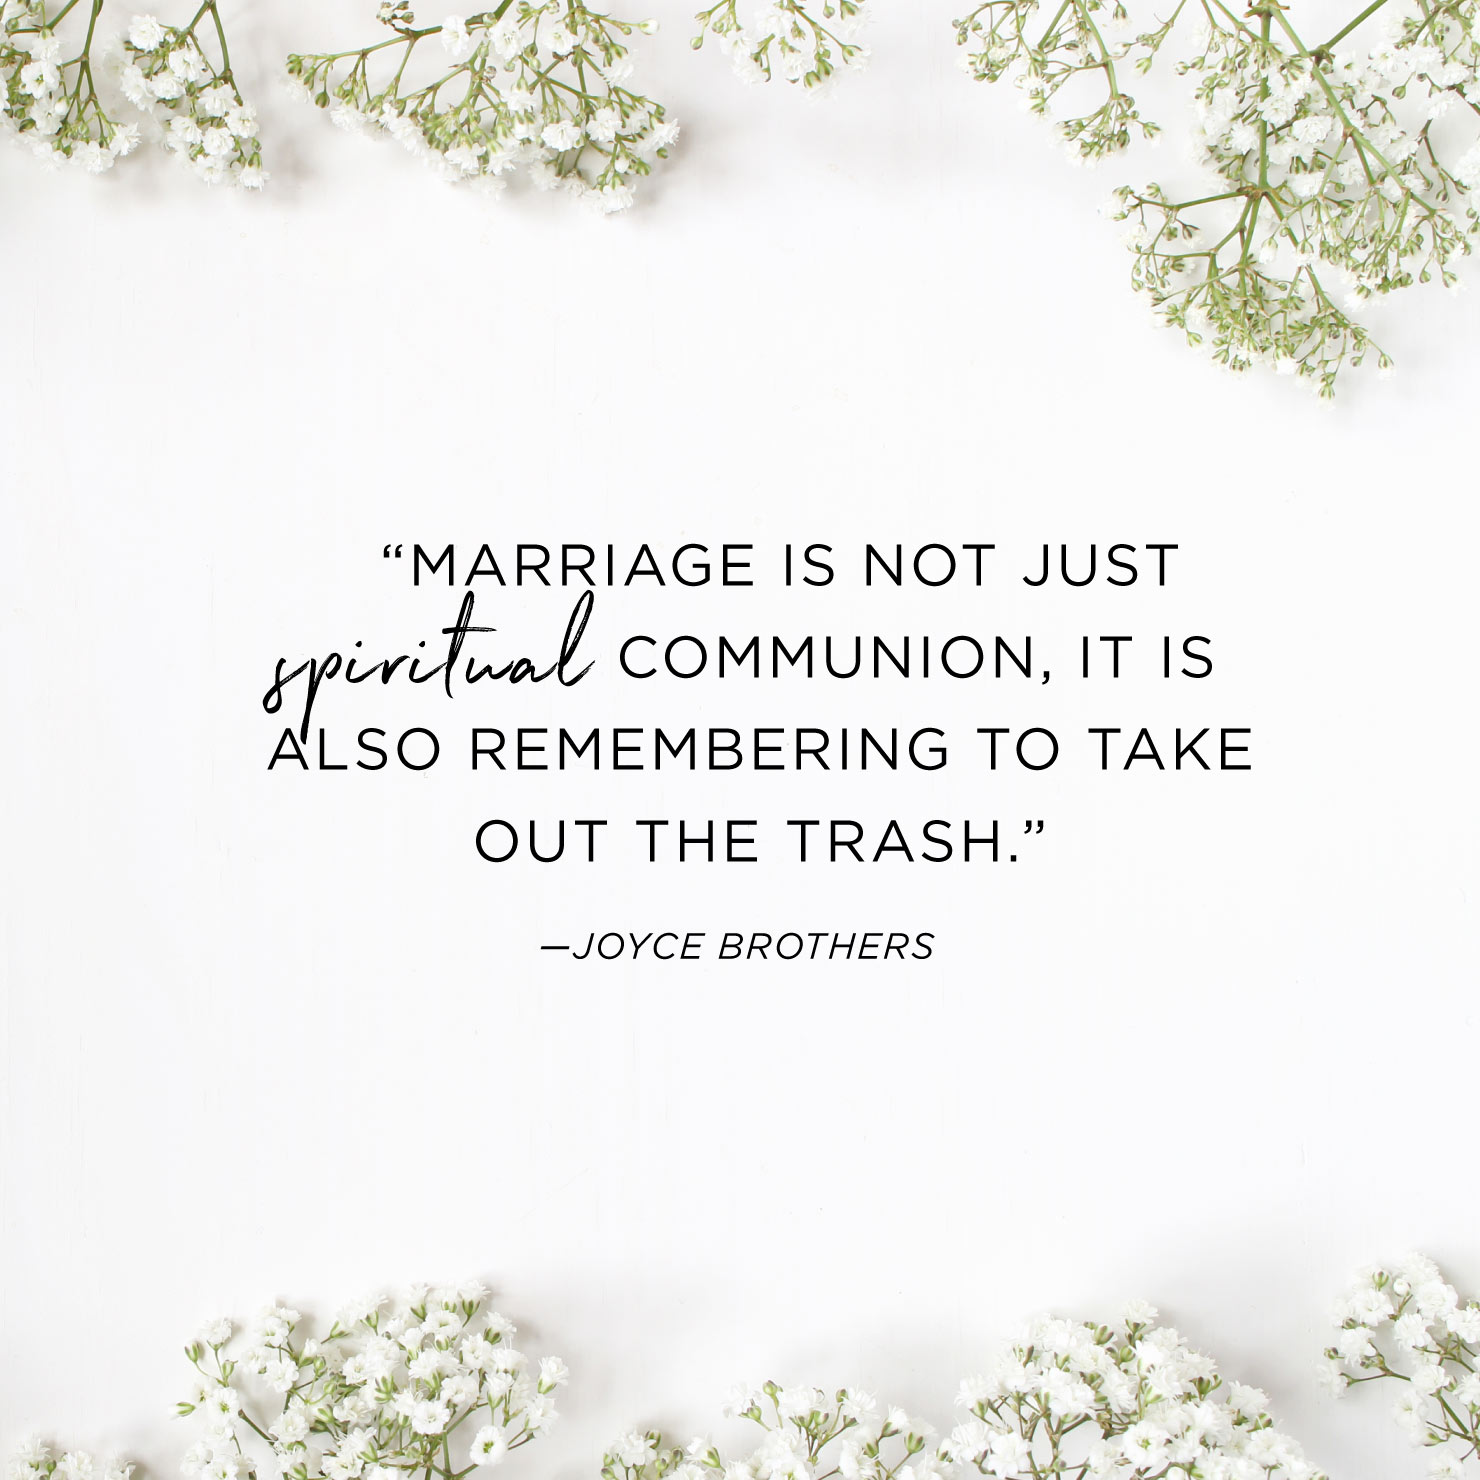 Quote above background image: Marriage is not just spiritual communion, it is also remembering to take out the trash. - Joyce Brothers